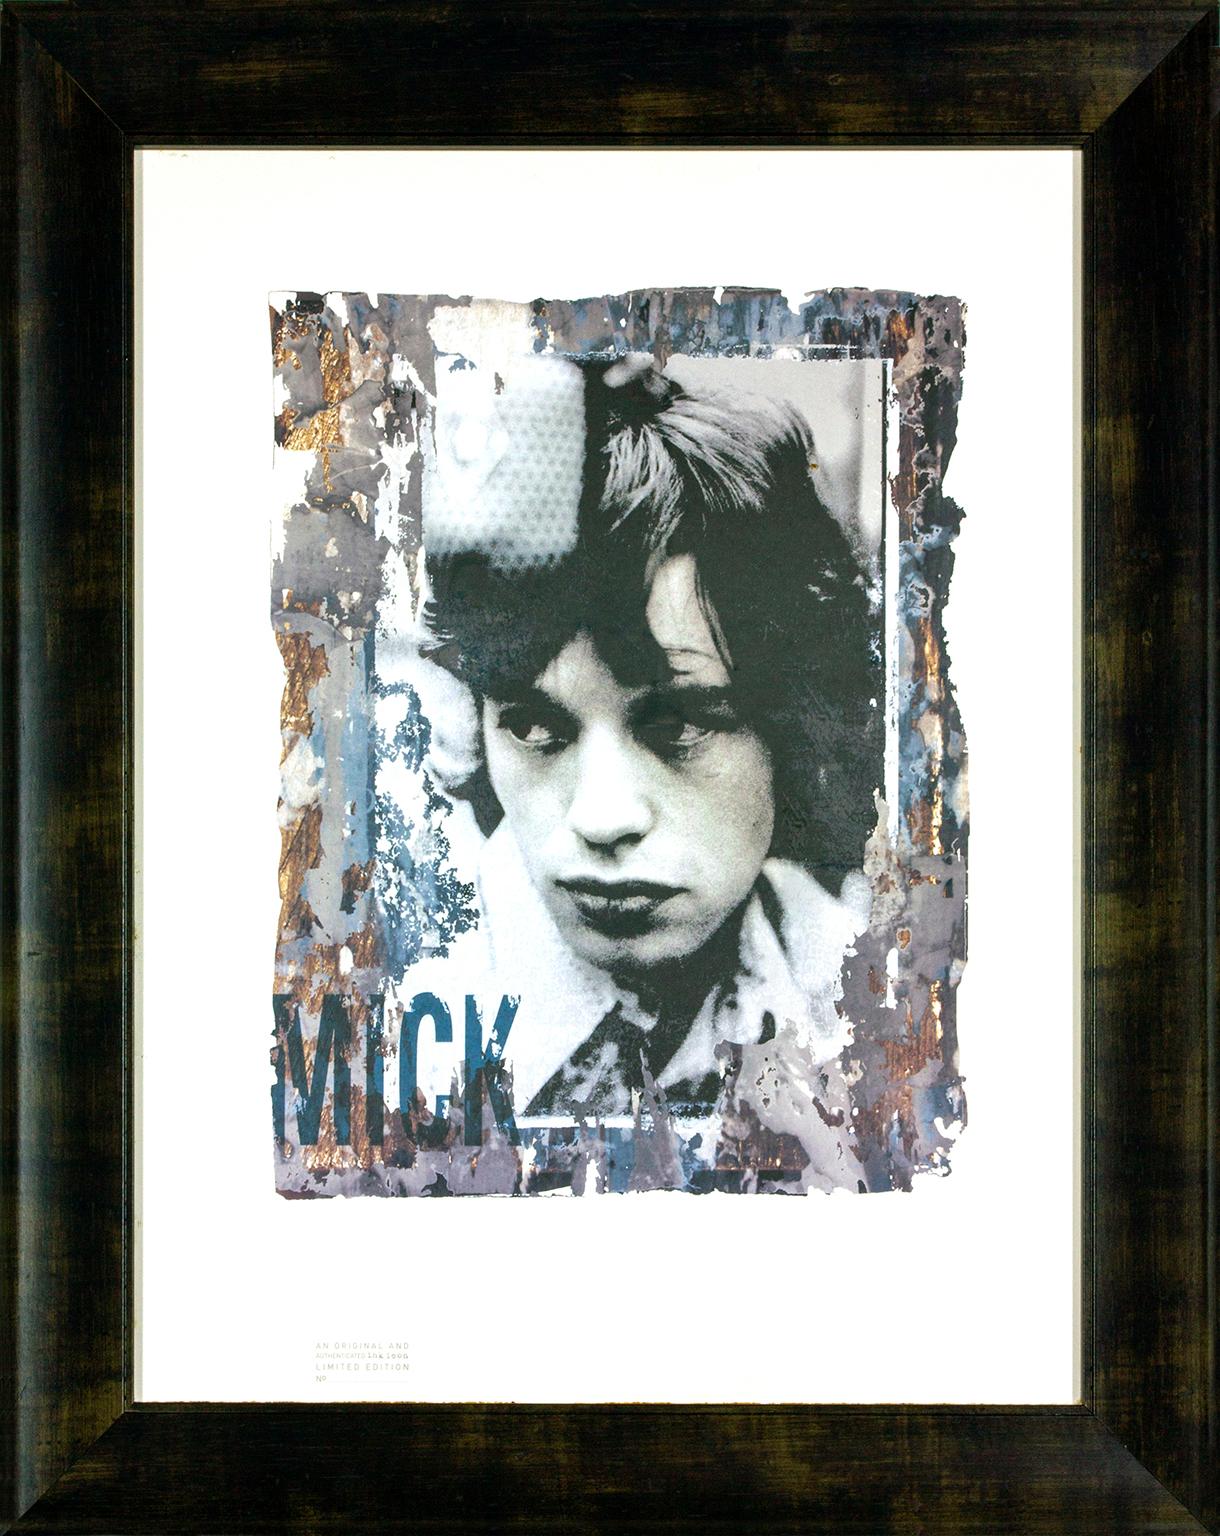 "Mick Jagger" limited edition silkscreen print by artist Gered Mankowitz. Image size: 19 3/4 x 15 inches. Embossed with stamp on lower left and The Gered Mankowitz Archive M and ? stamp on lower right. "An Original and Authenticated ink icon Limited